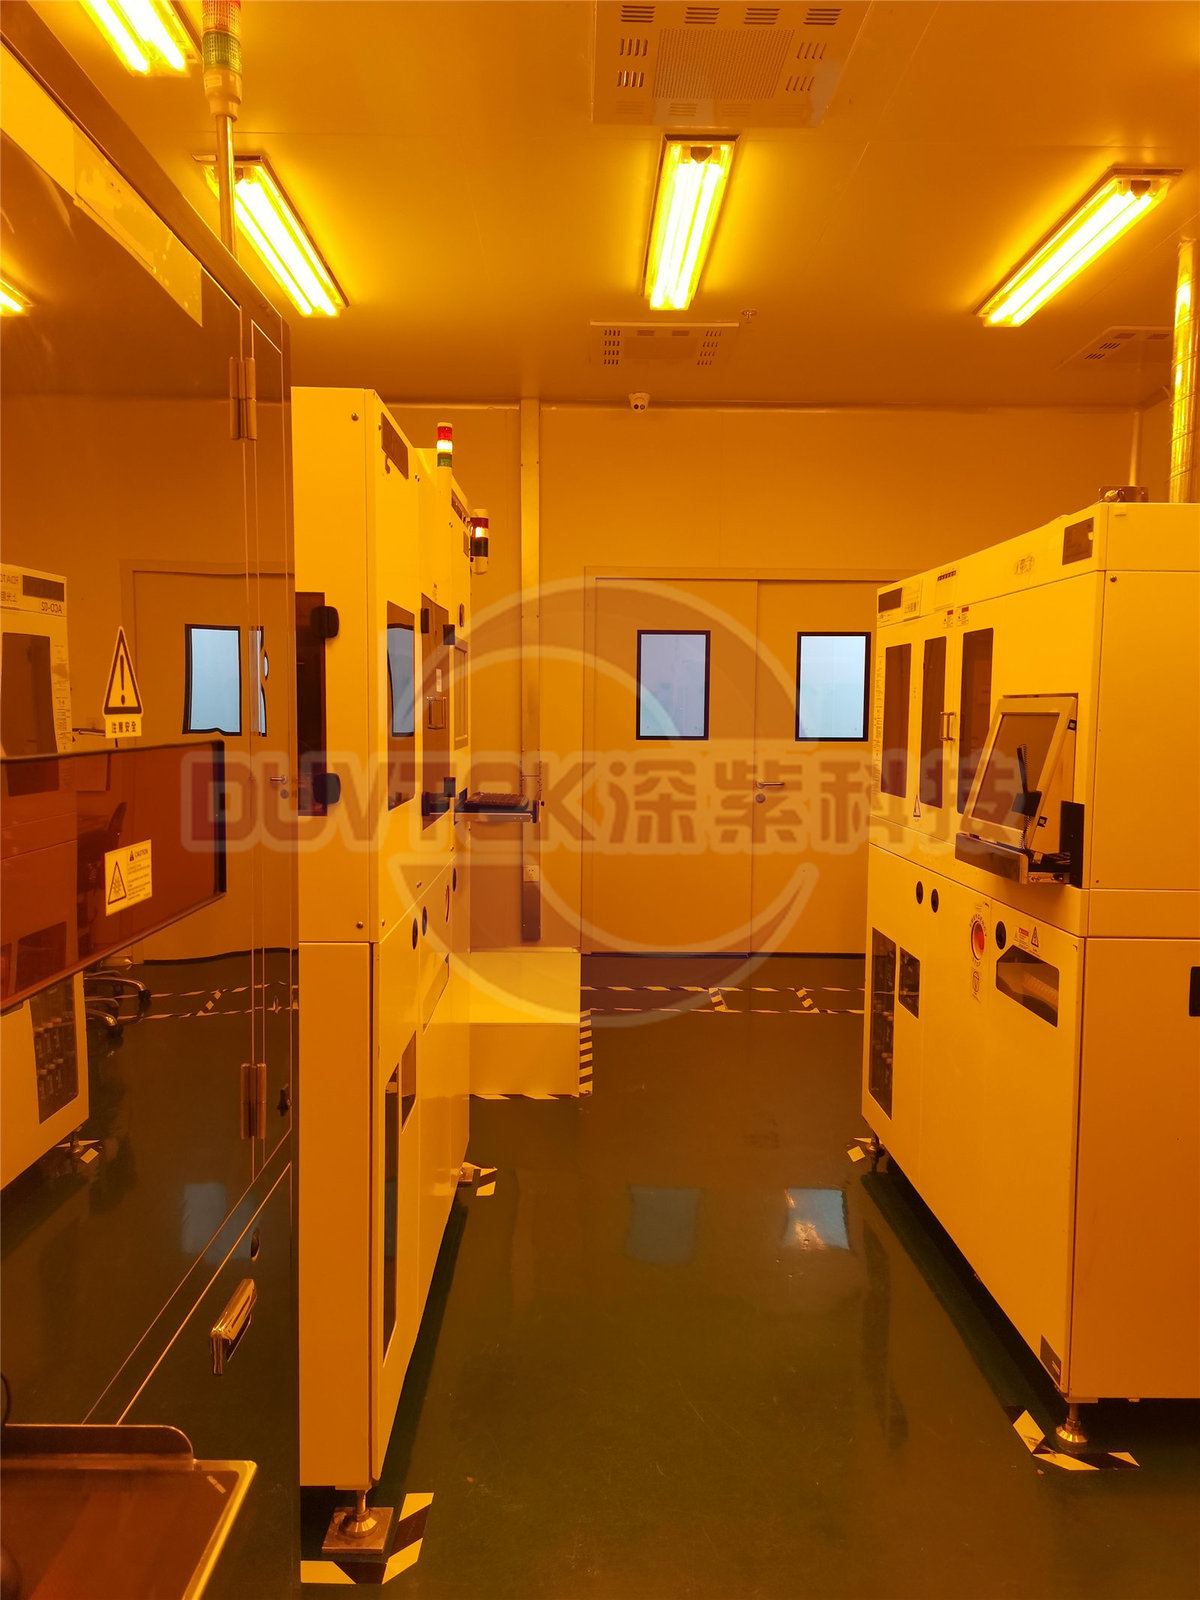 Cleanroom (lithography)
